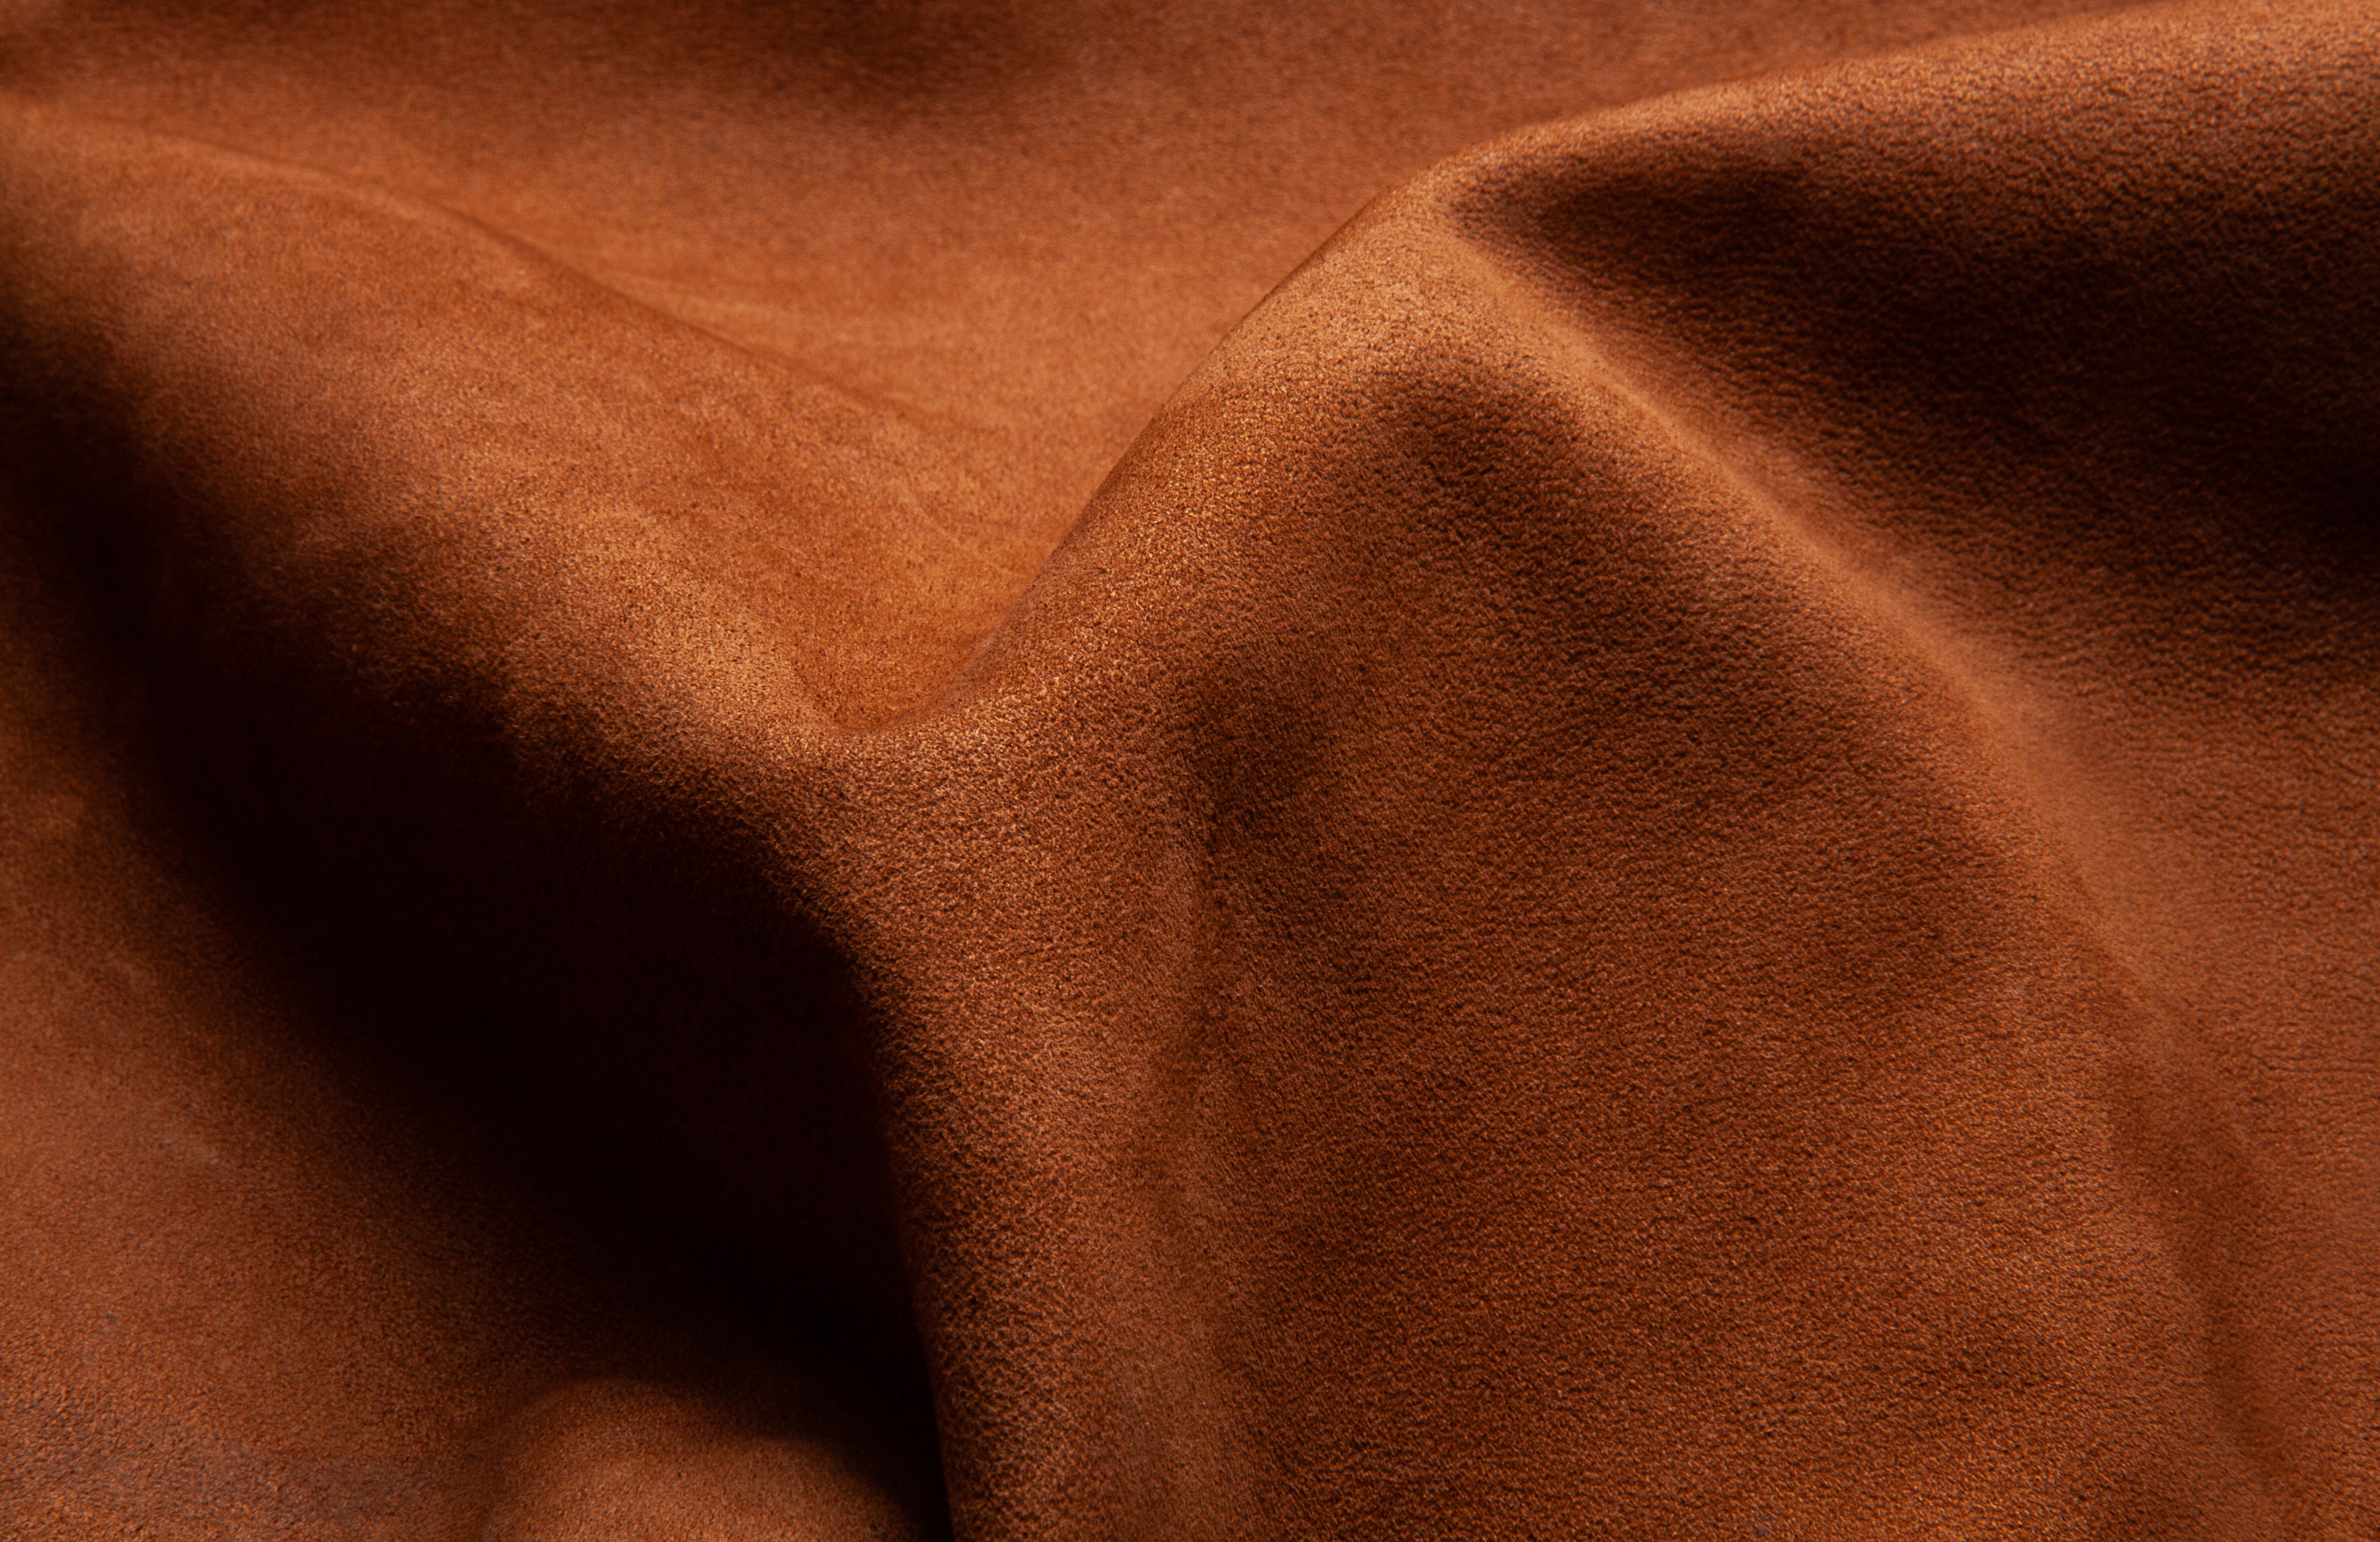 texture, textures, brown, folds, pleating, leather, skin